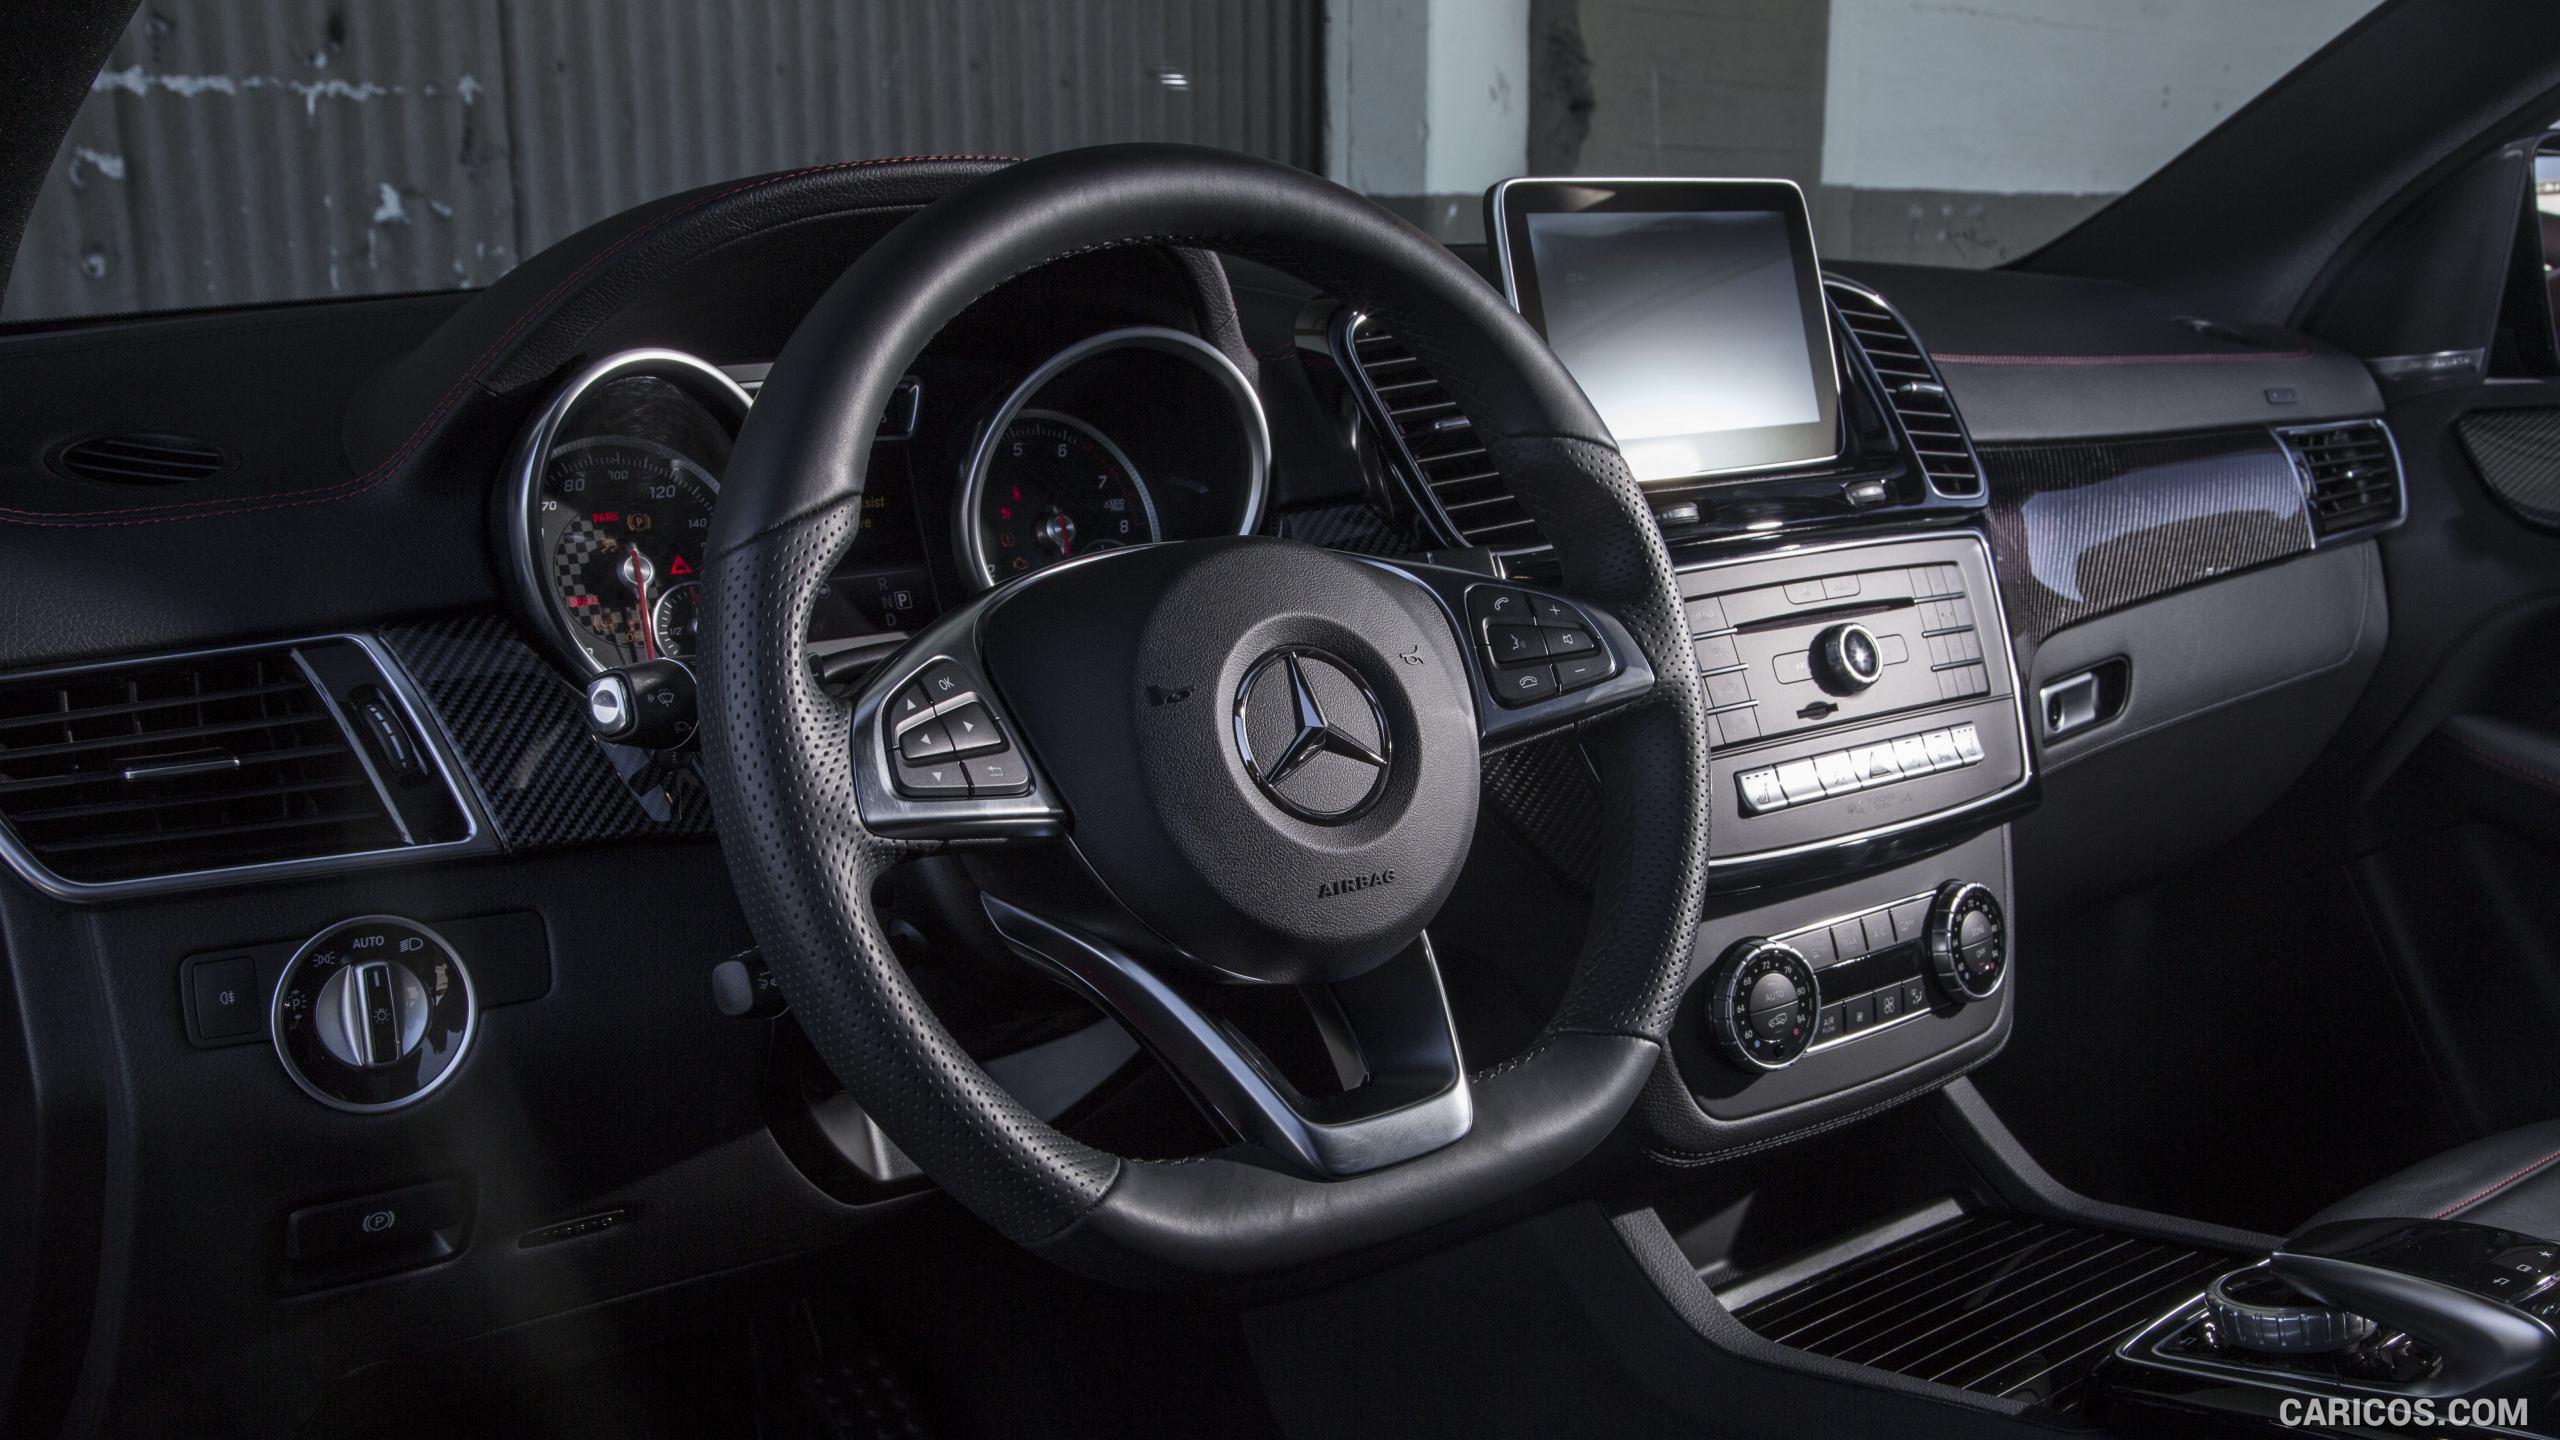 2016 Mercedes-Benz GLE 450 AMG Coupe 4MATIC (US-Spec) - Interior, #82 of 115